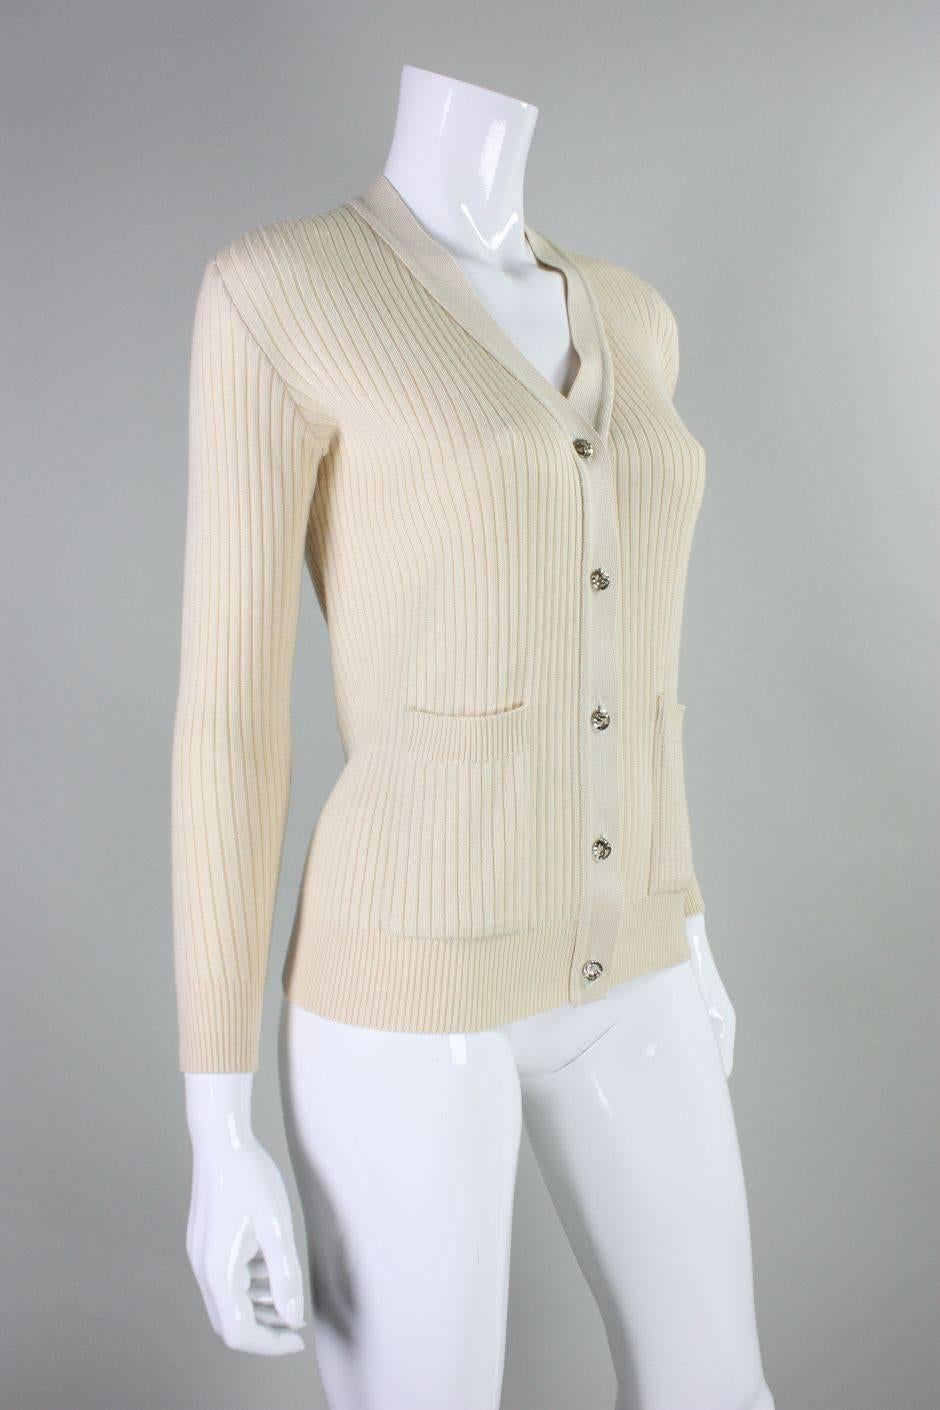 Vintage cardigan from Hermes dates to the 1970s and is made of a beige cashmere/silk blend.  Two patch pockets at waist.  Center front 5 button closure.  Ribbed trim around neckline, cuffs, and waist.  Labeled vintage size 40.
Measurements
Bust: